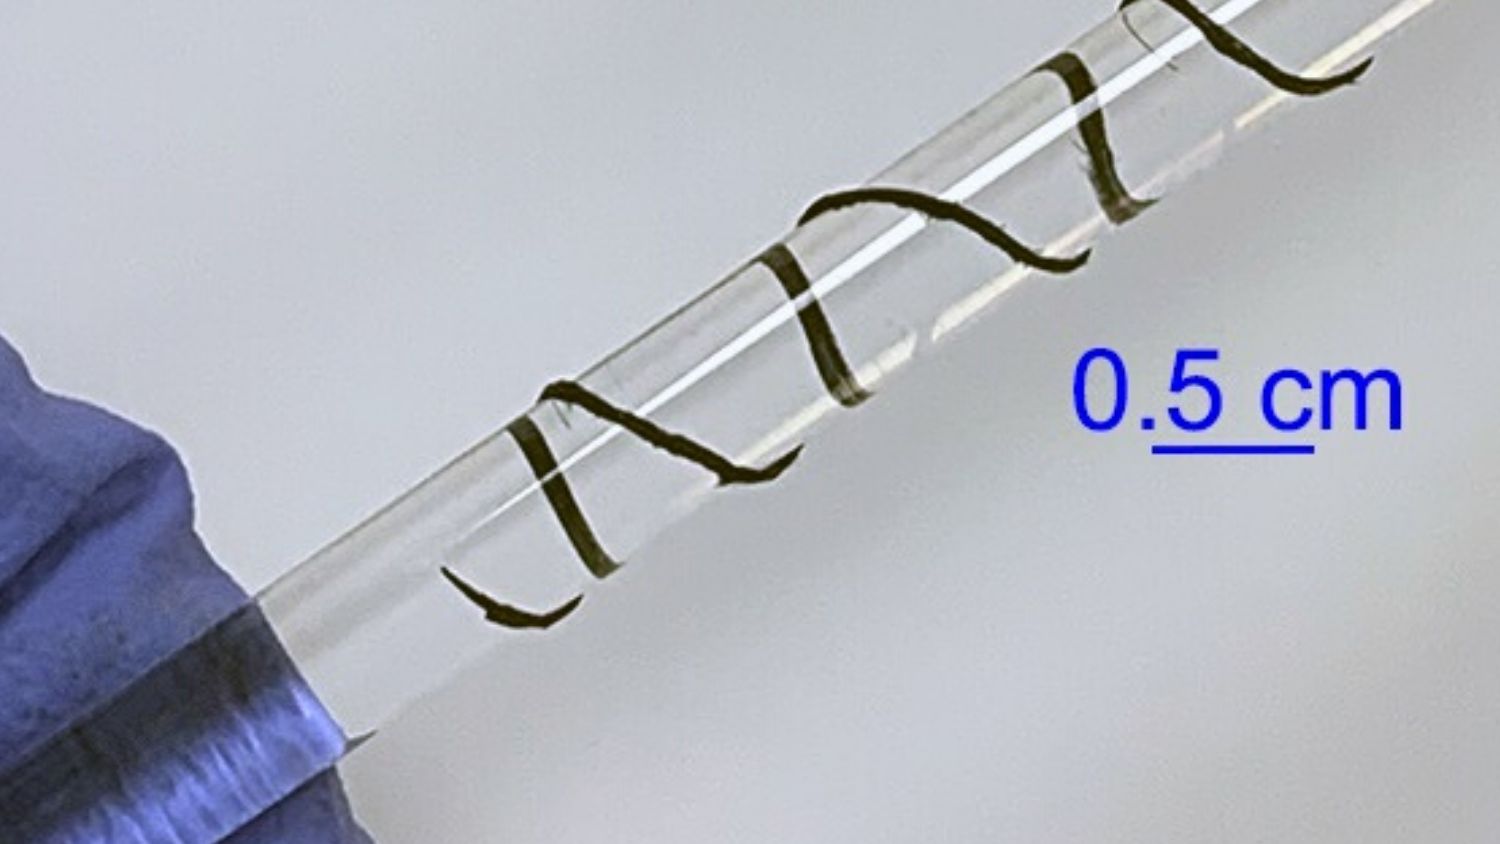 Carbon nanotube material wound around a tube.